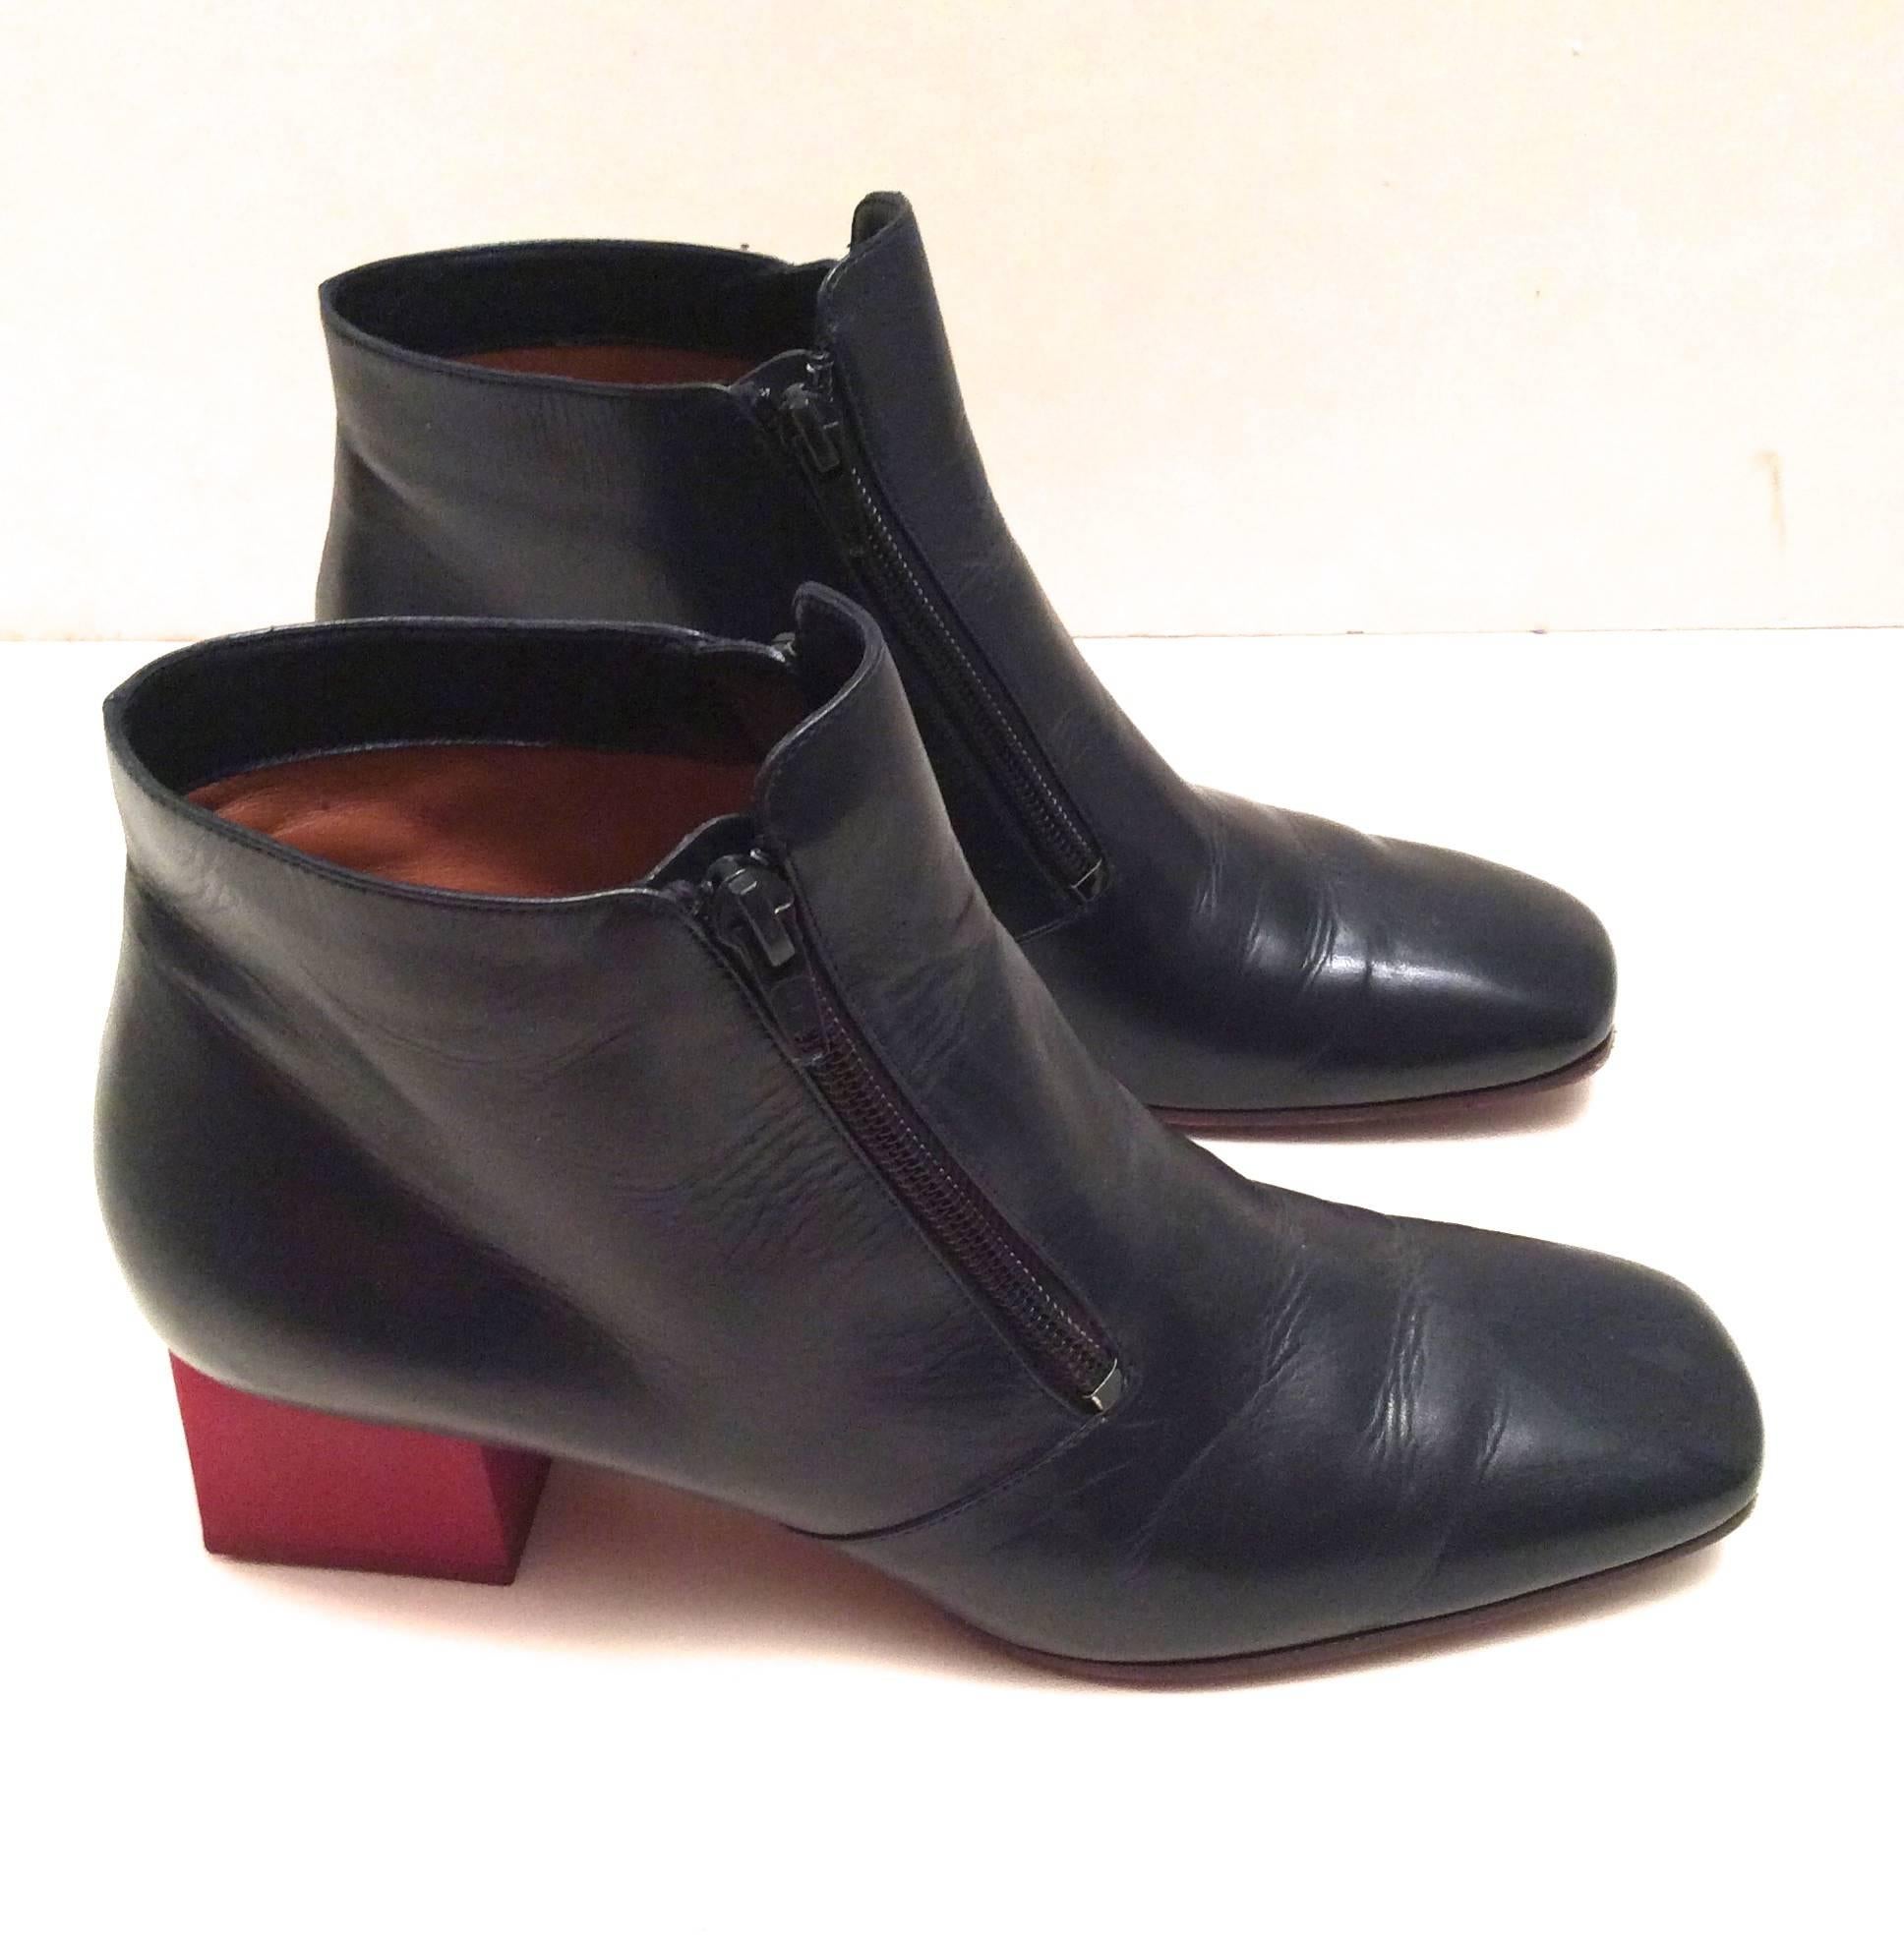 Celine Boots - Short Navy Leather with Red Heel - Size 37.5 For Sale 1